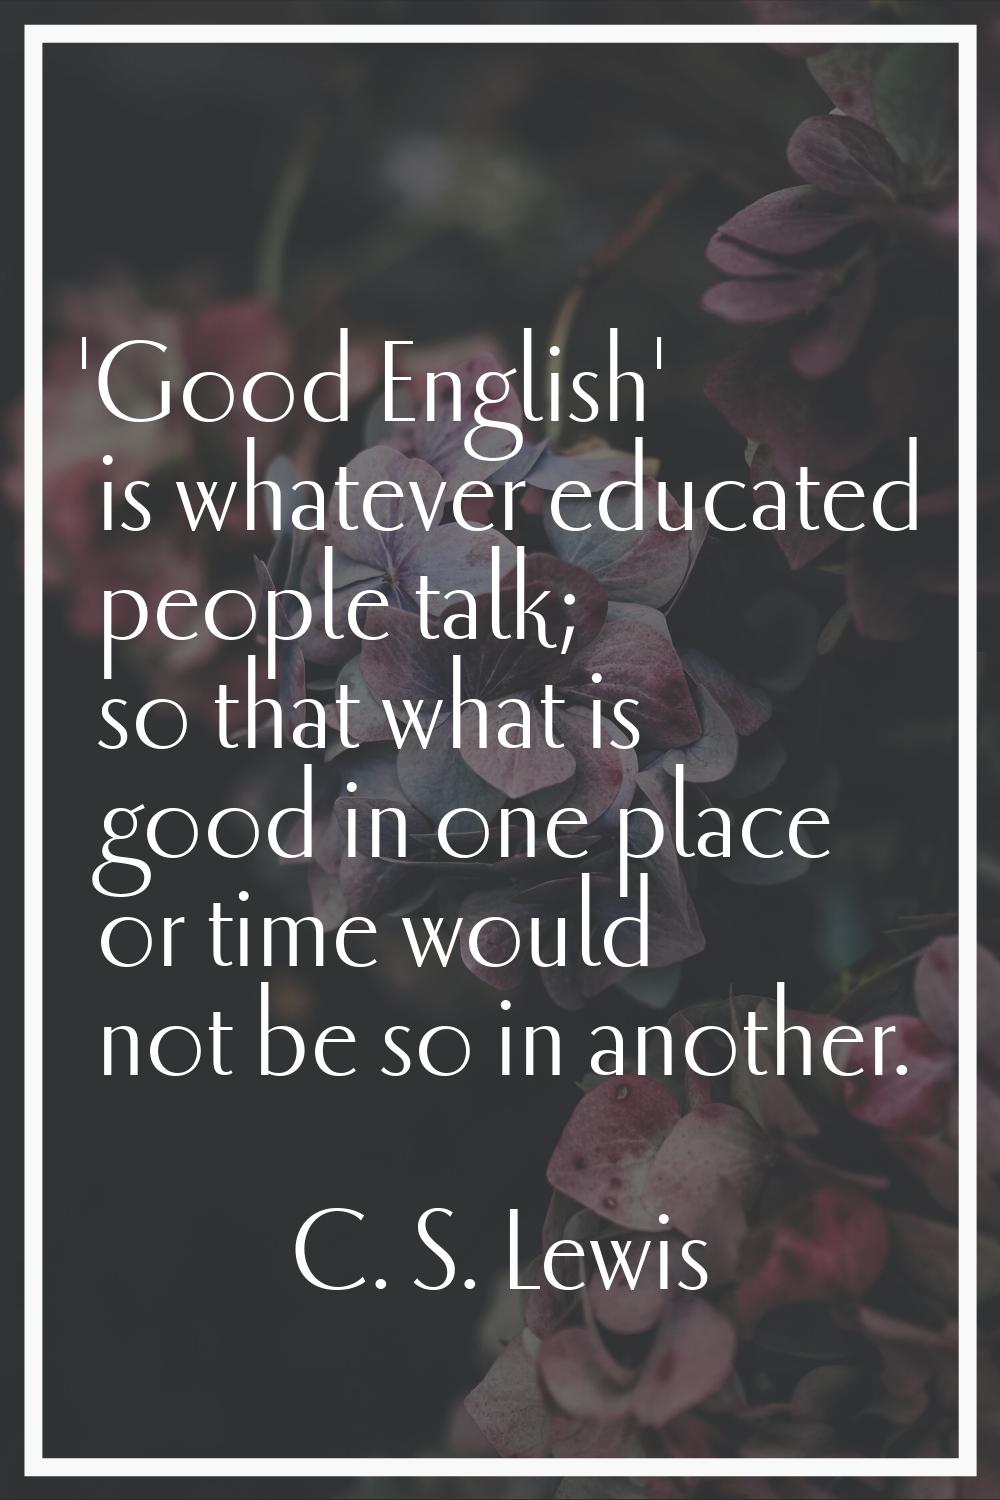 'Good English' is whatever educated people talk; so that what is good in one place or time would no